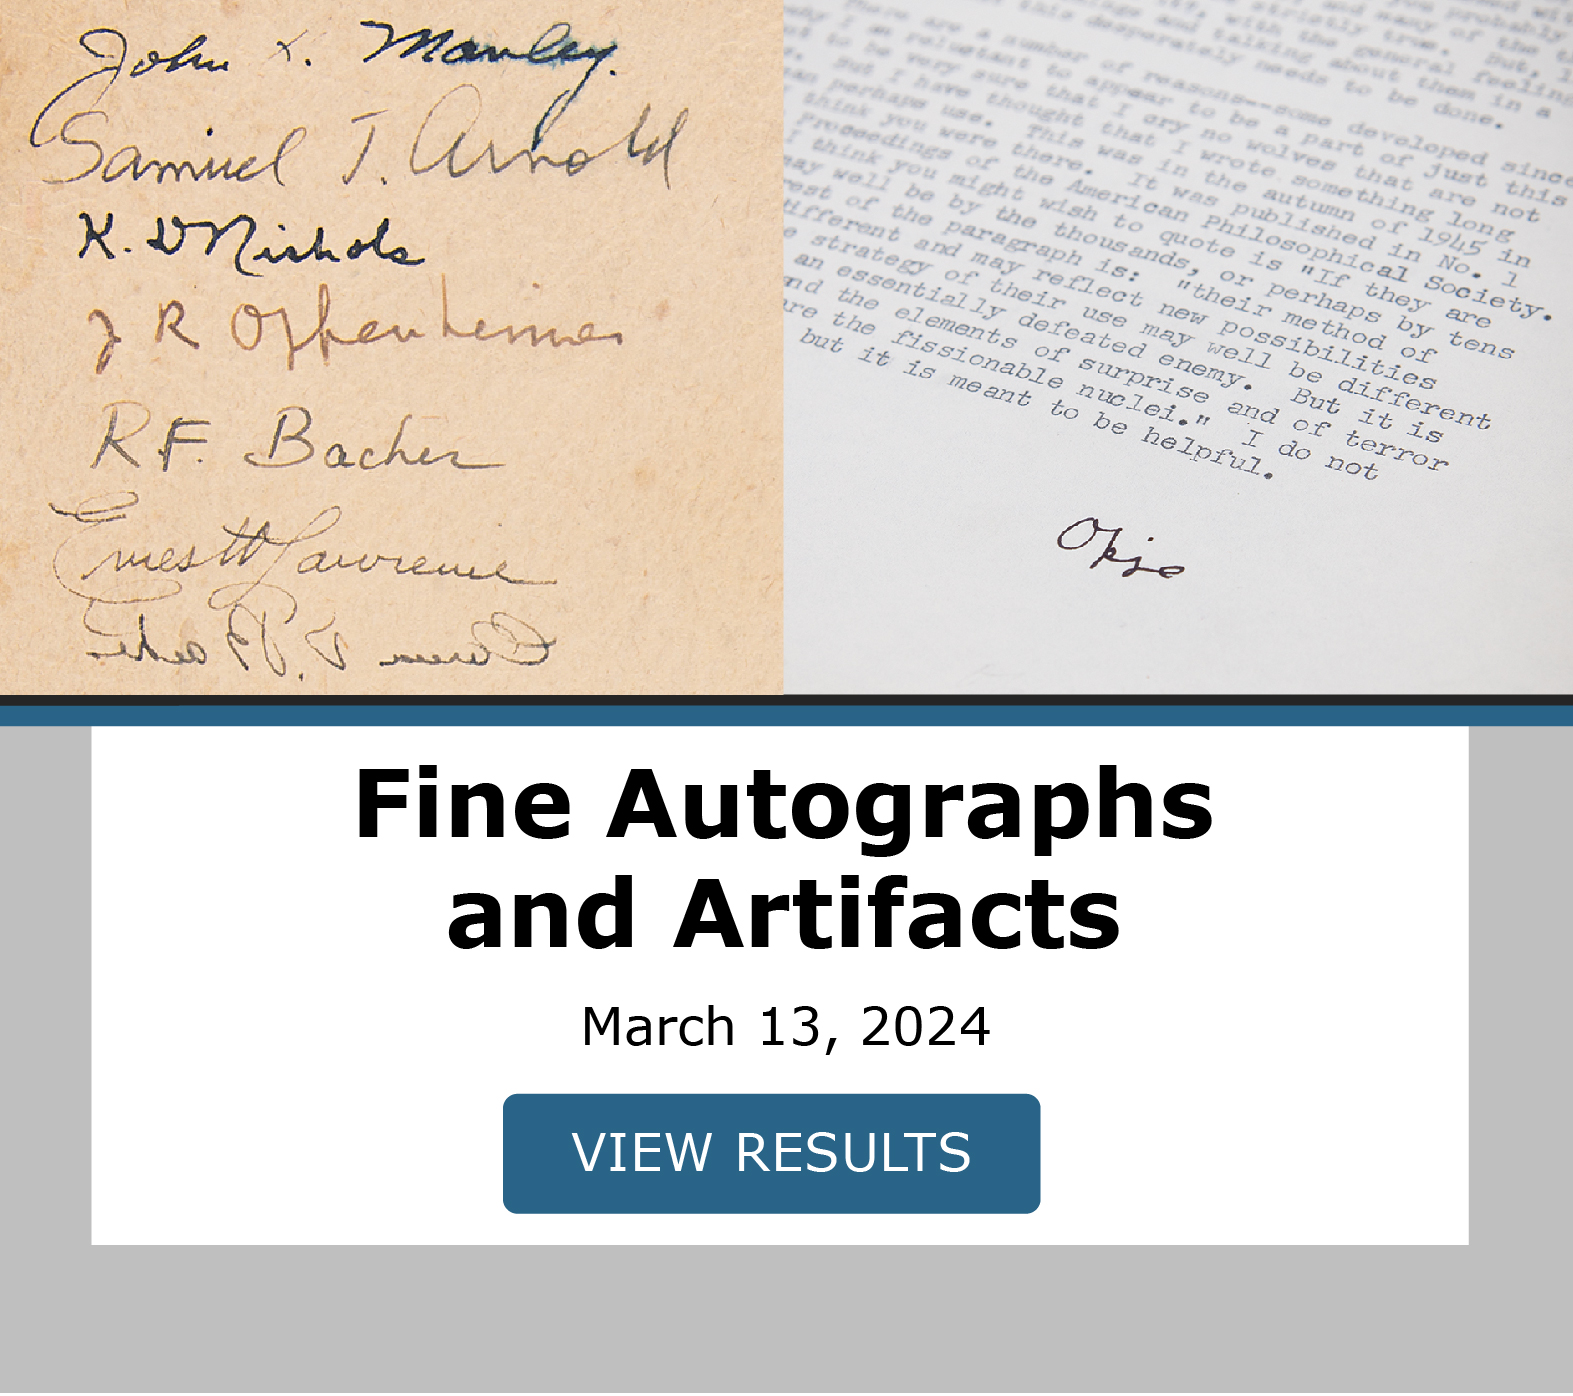 Fine Autographs and Artifacts Featuring Animation. Bidding closed March 13. View Results!